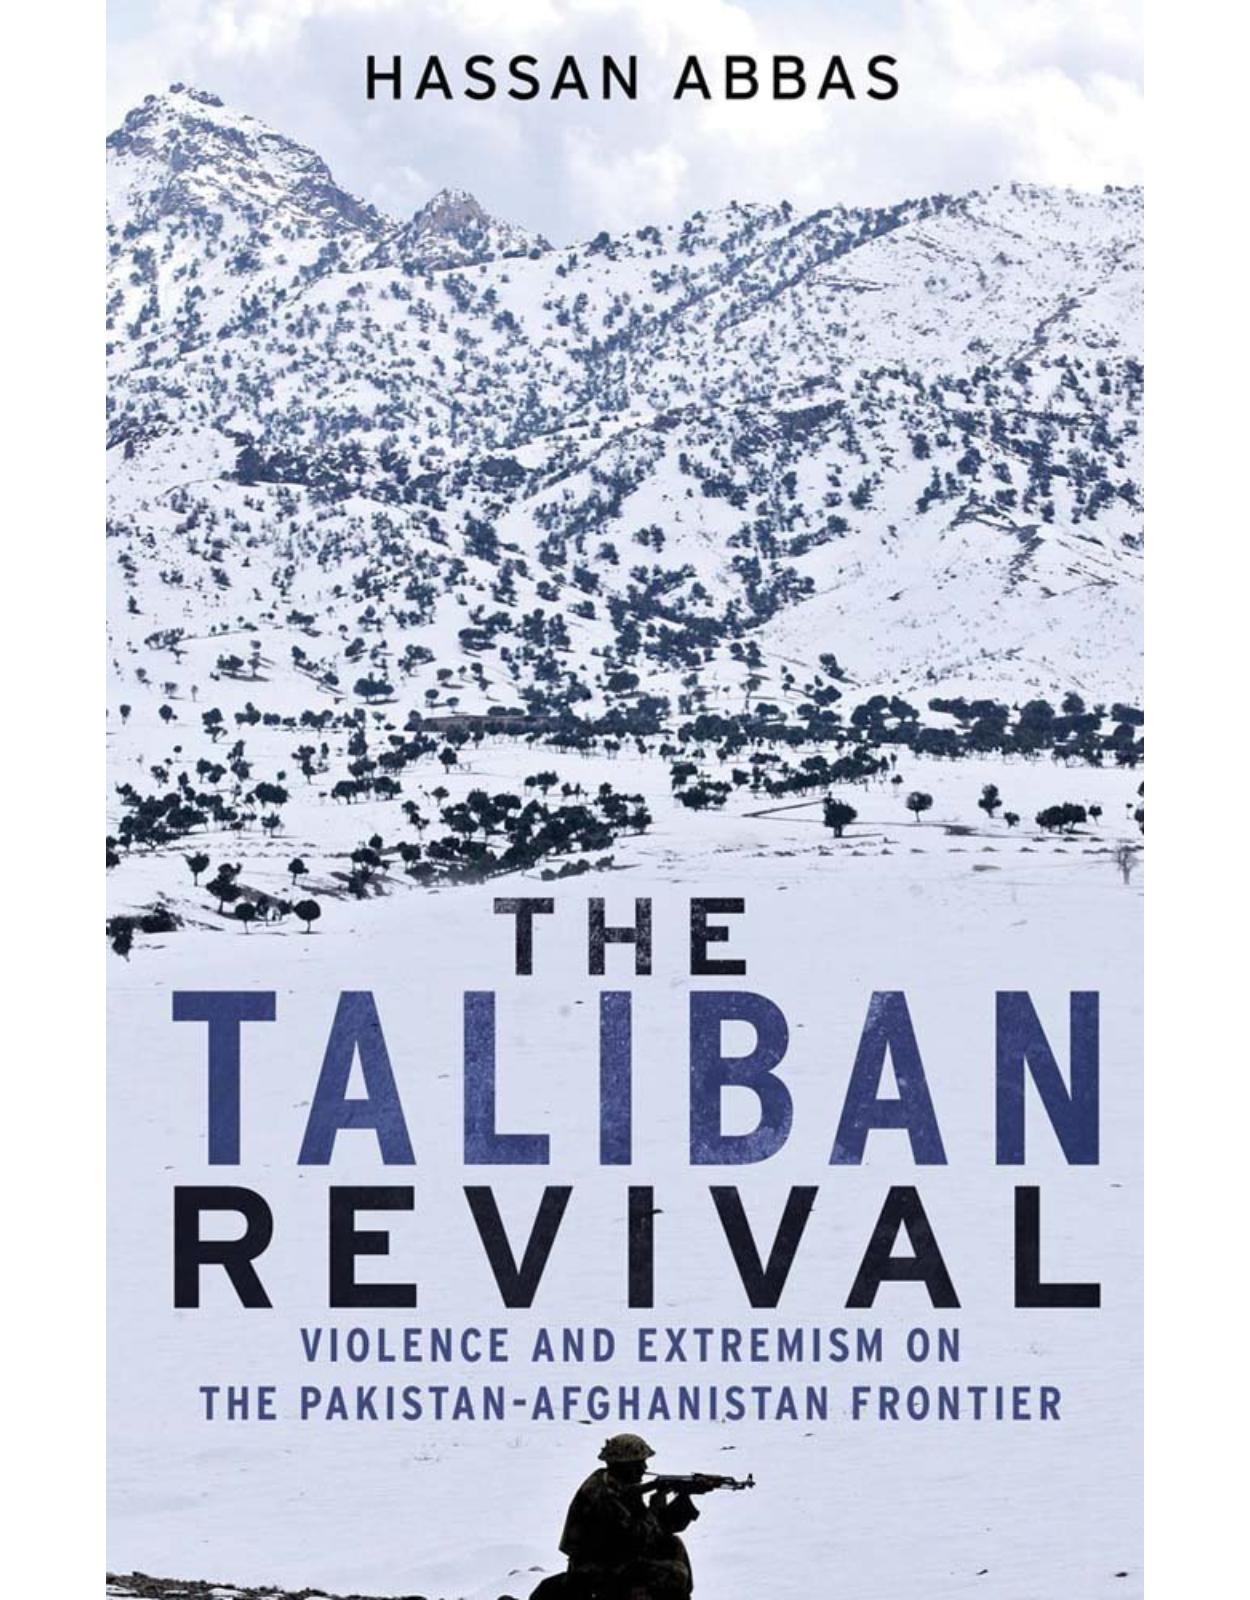 Taliban Revival. Violence and Extremism on the Pakistan-Afghanistan Frontier